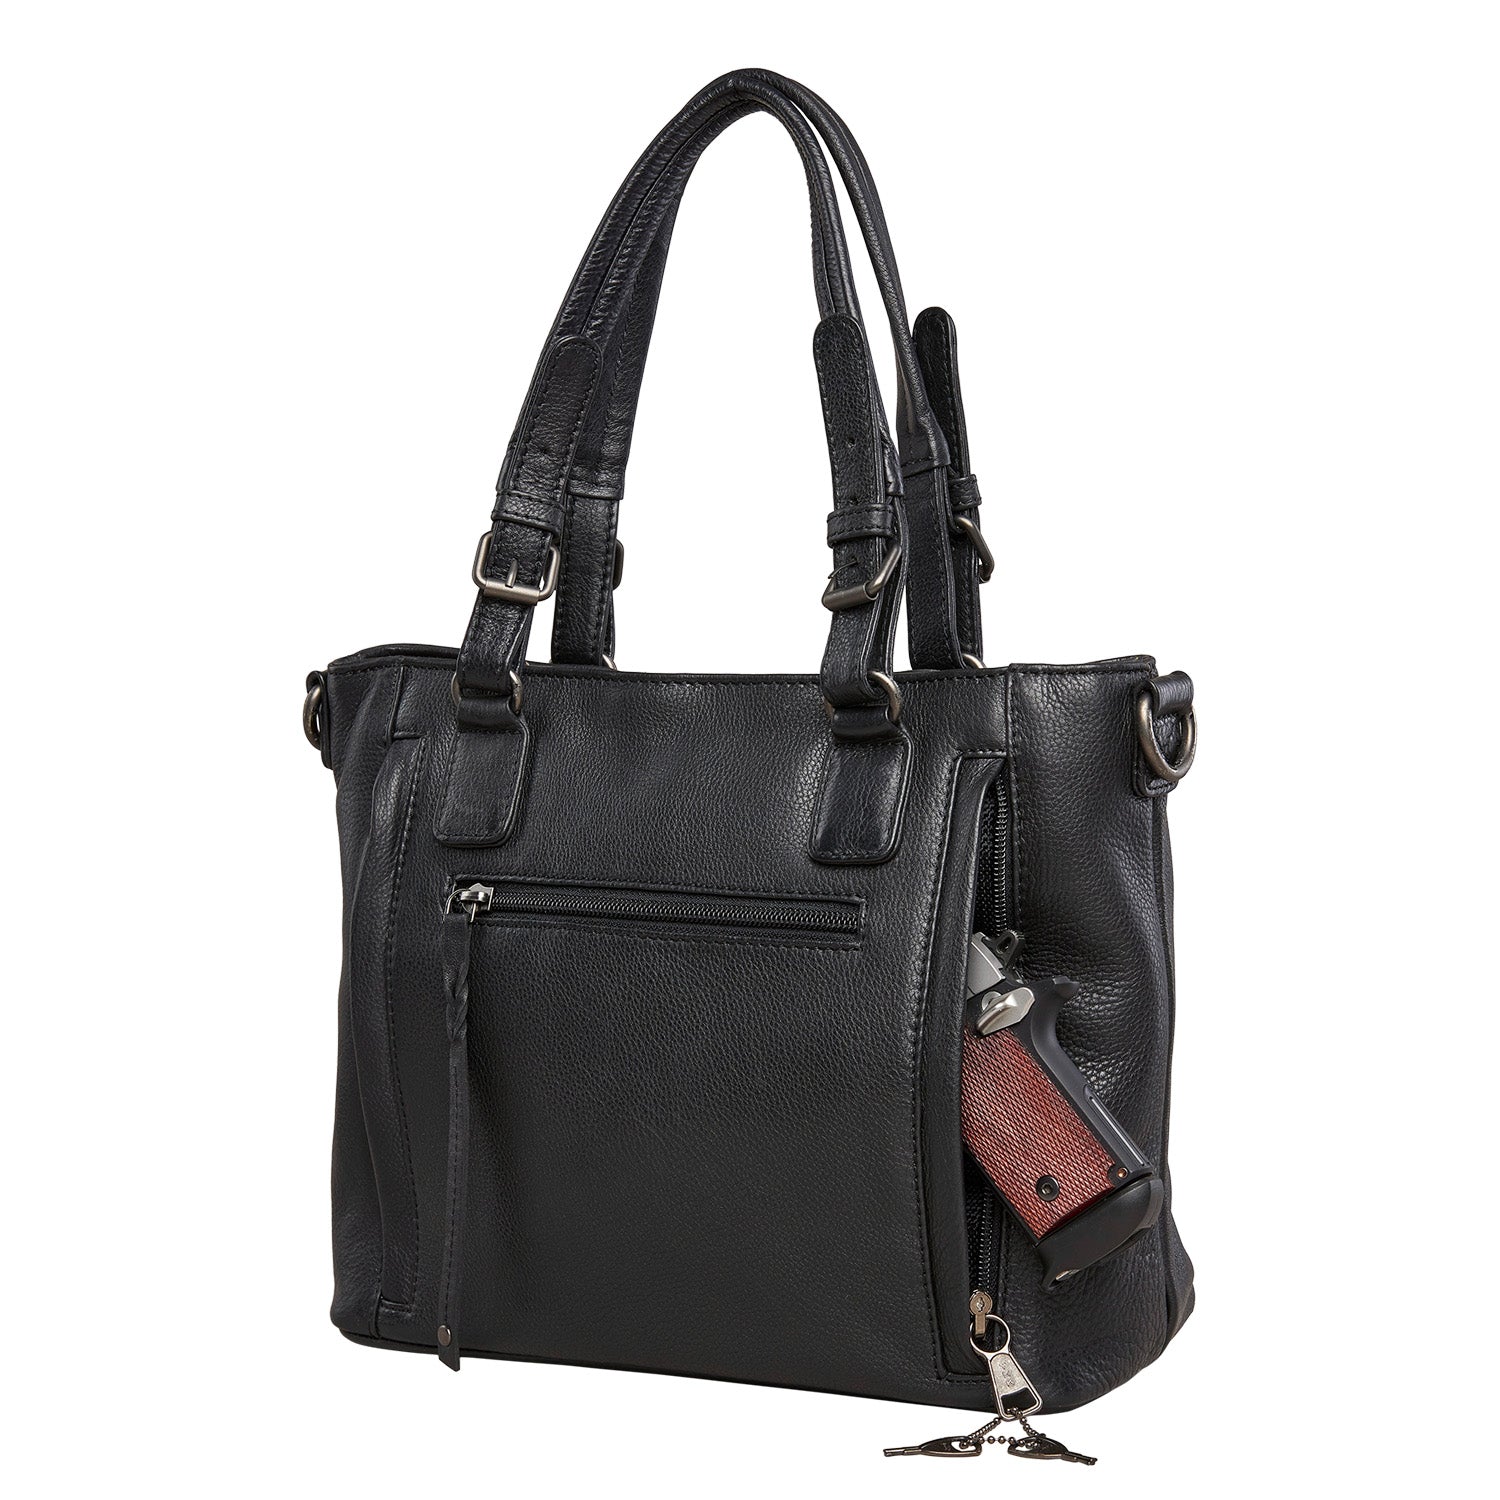 Jessica Moore Satchel | Concealed Carry Purses for Women – Lady Conceal